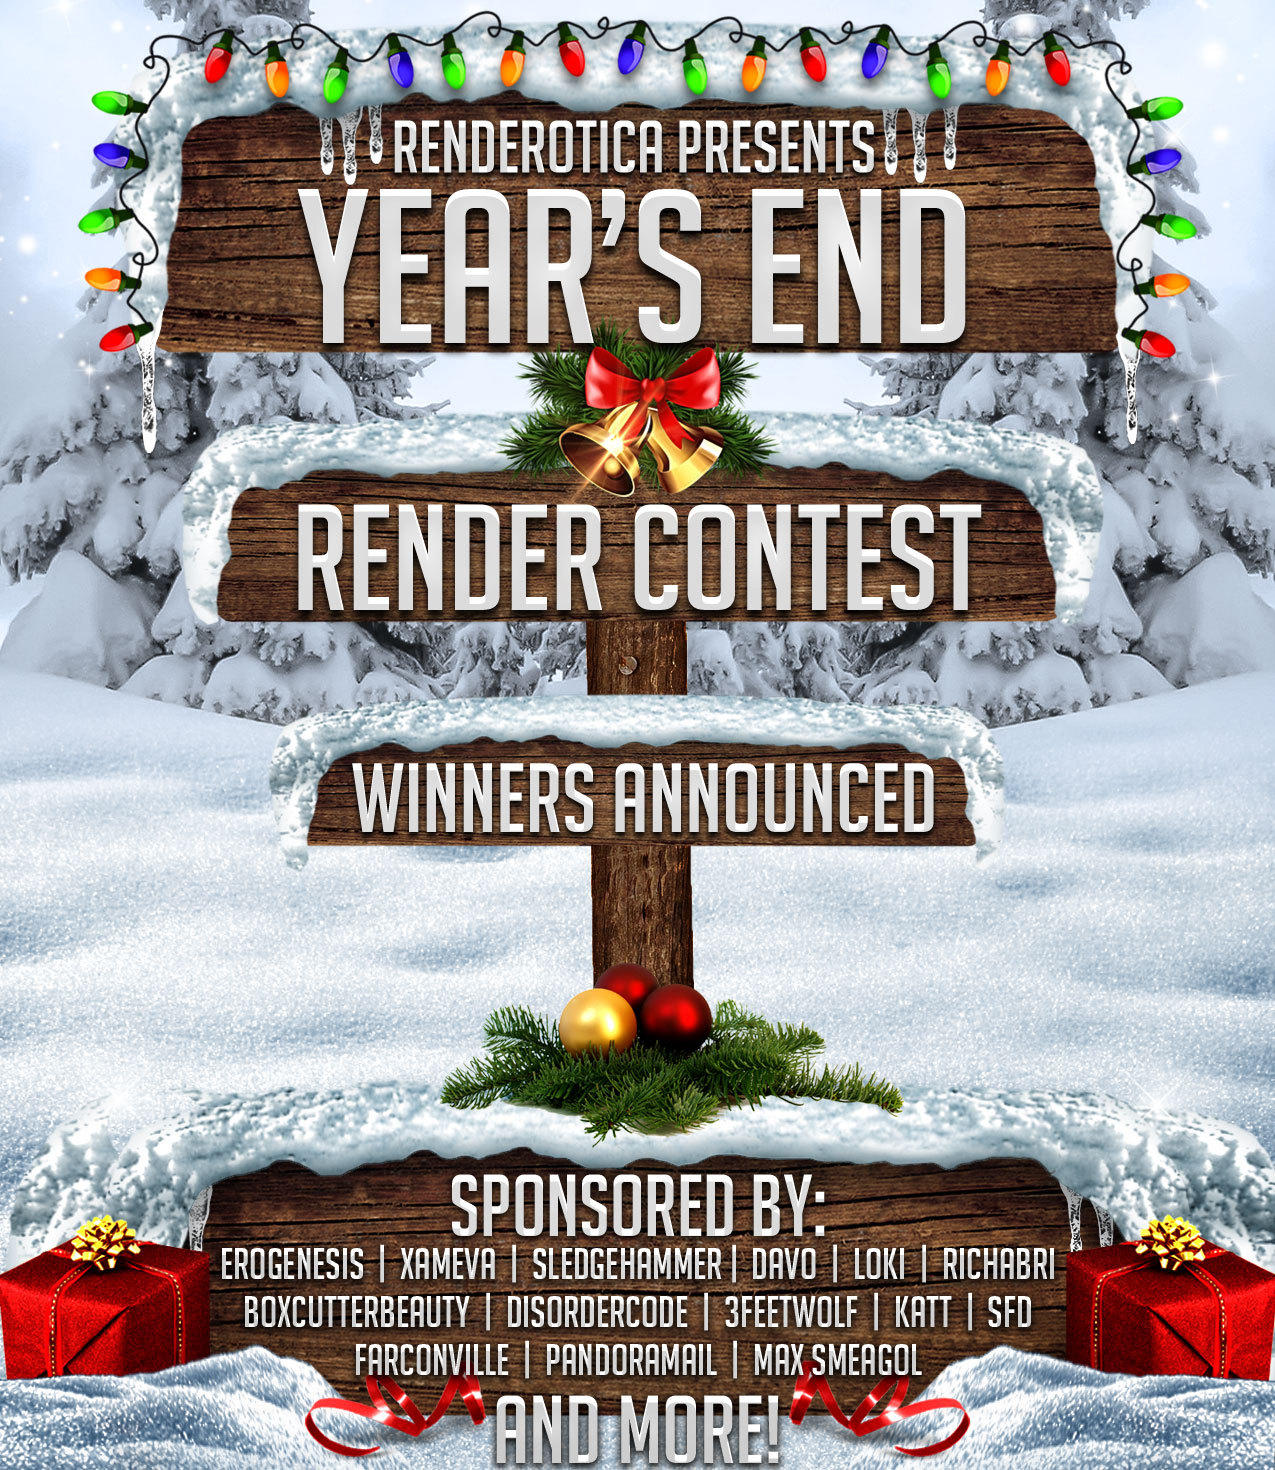  The holidays are over and so is the judging for Renderotica&rsquo;s 2015  Year&rsquo;s